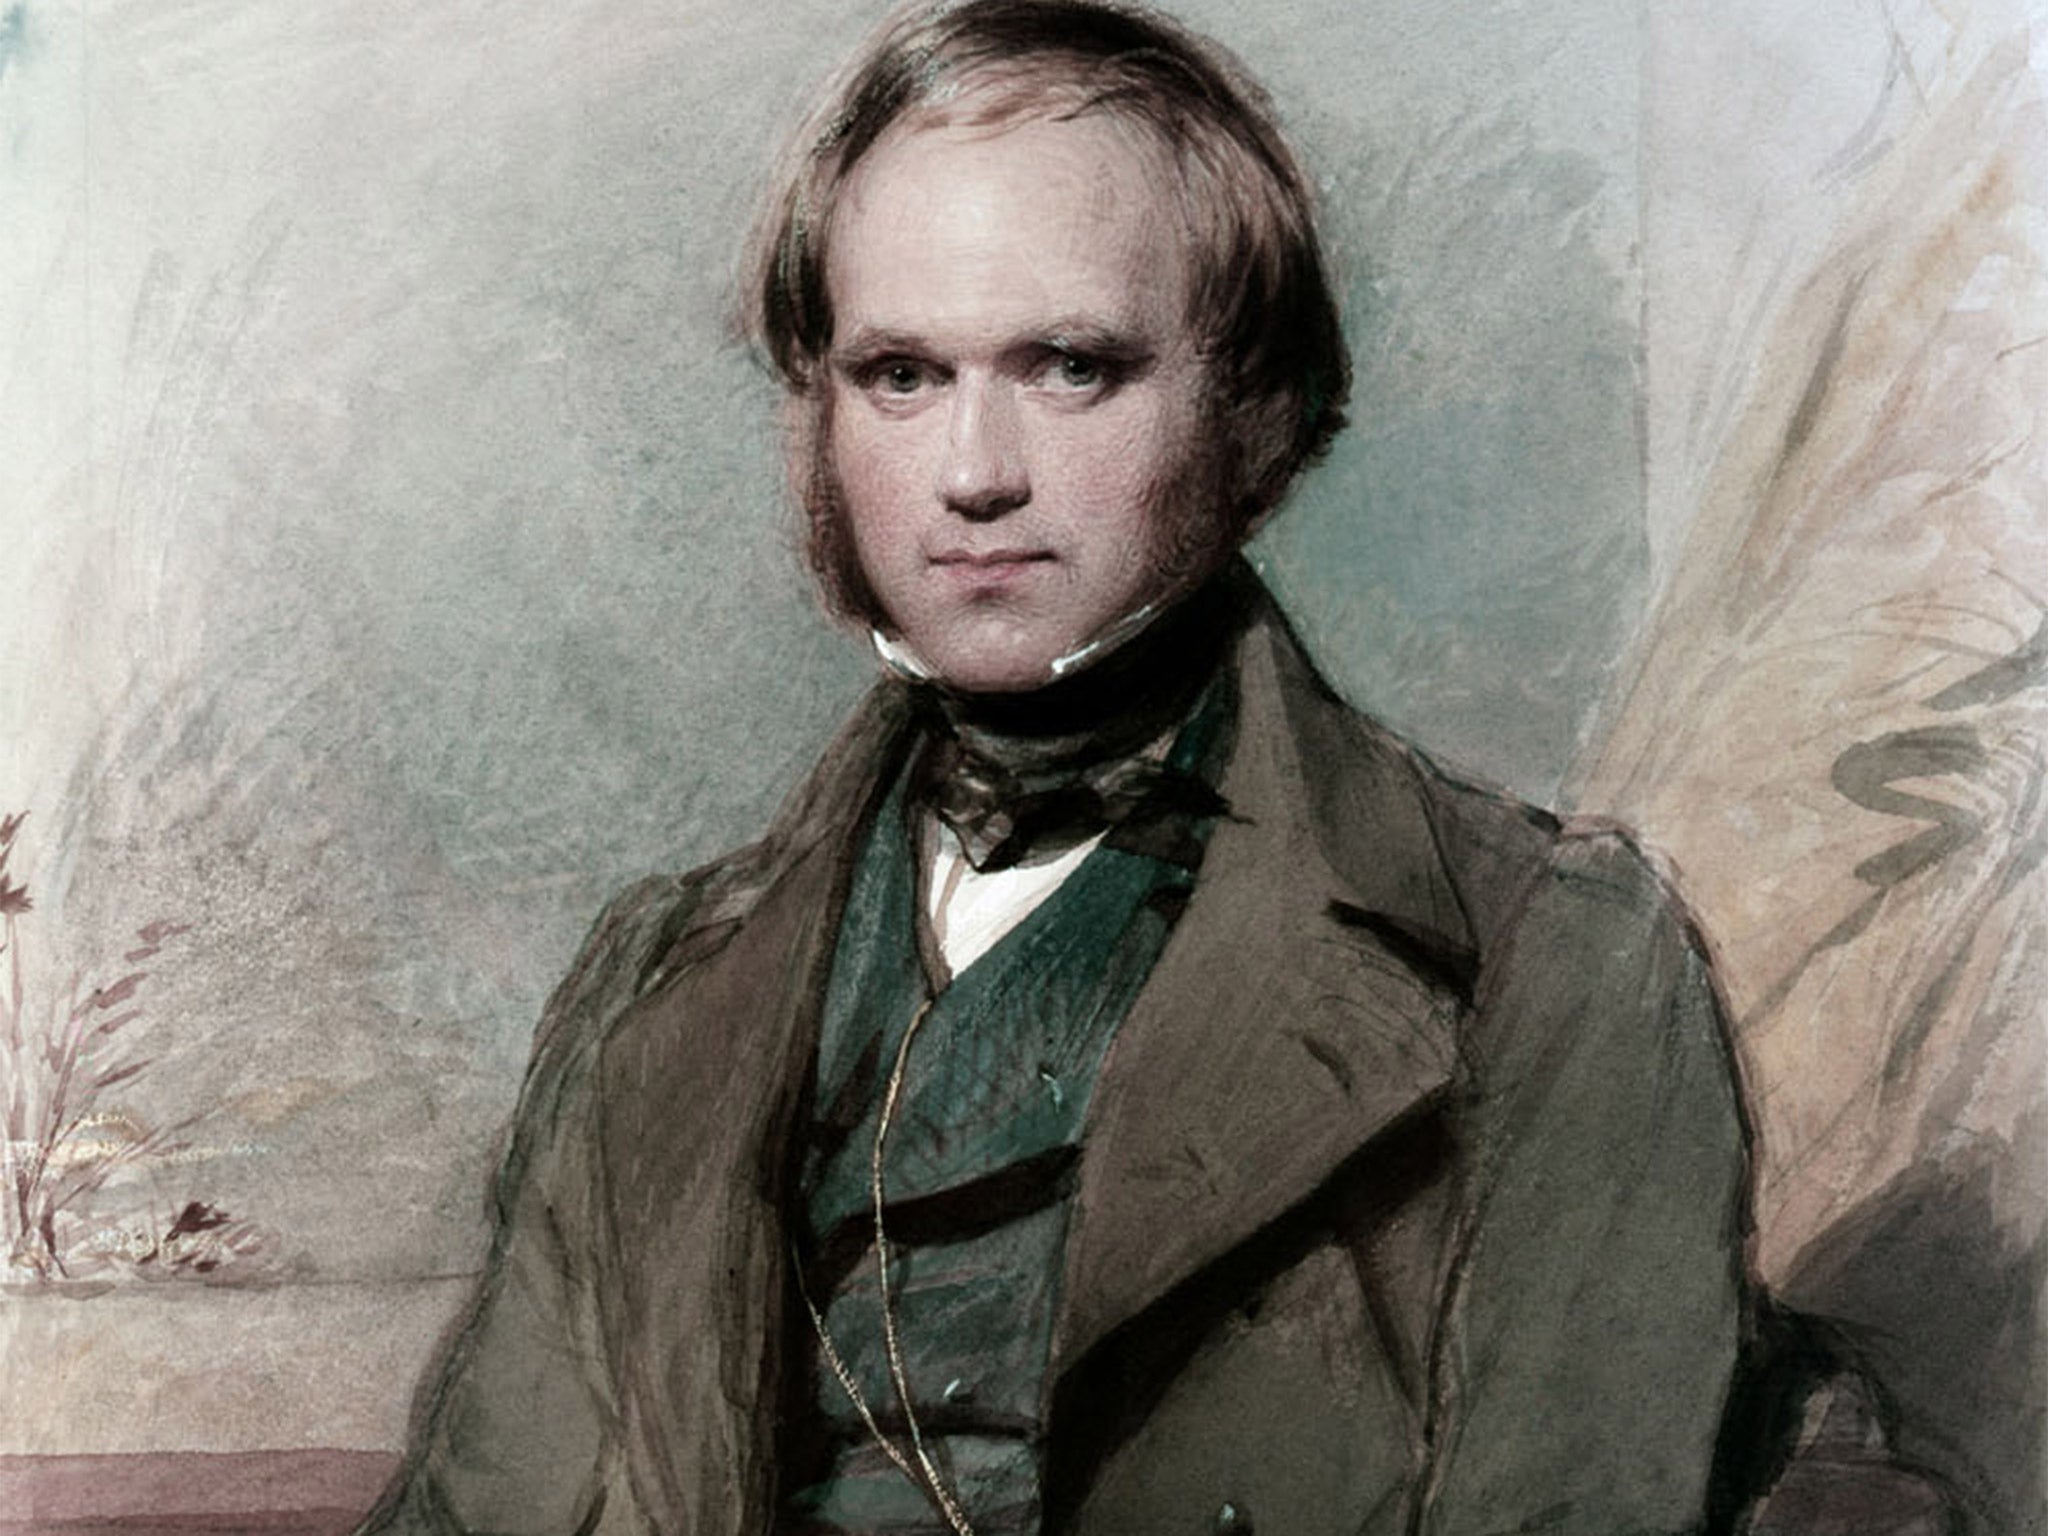 The young sea-faring Charles Darwin – seen here in an 1809 portrait – is to be portrayed as an Indiana Jones-style adventurer